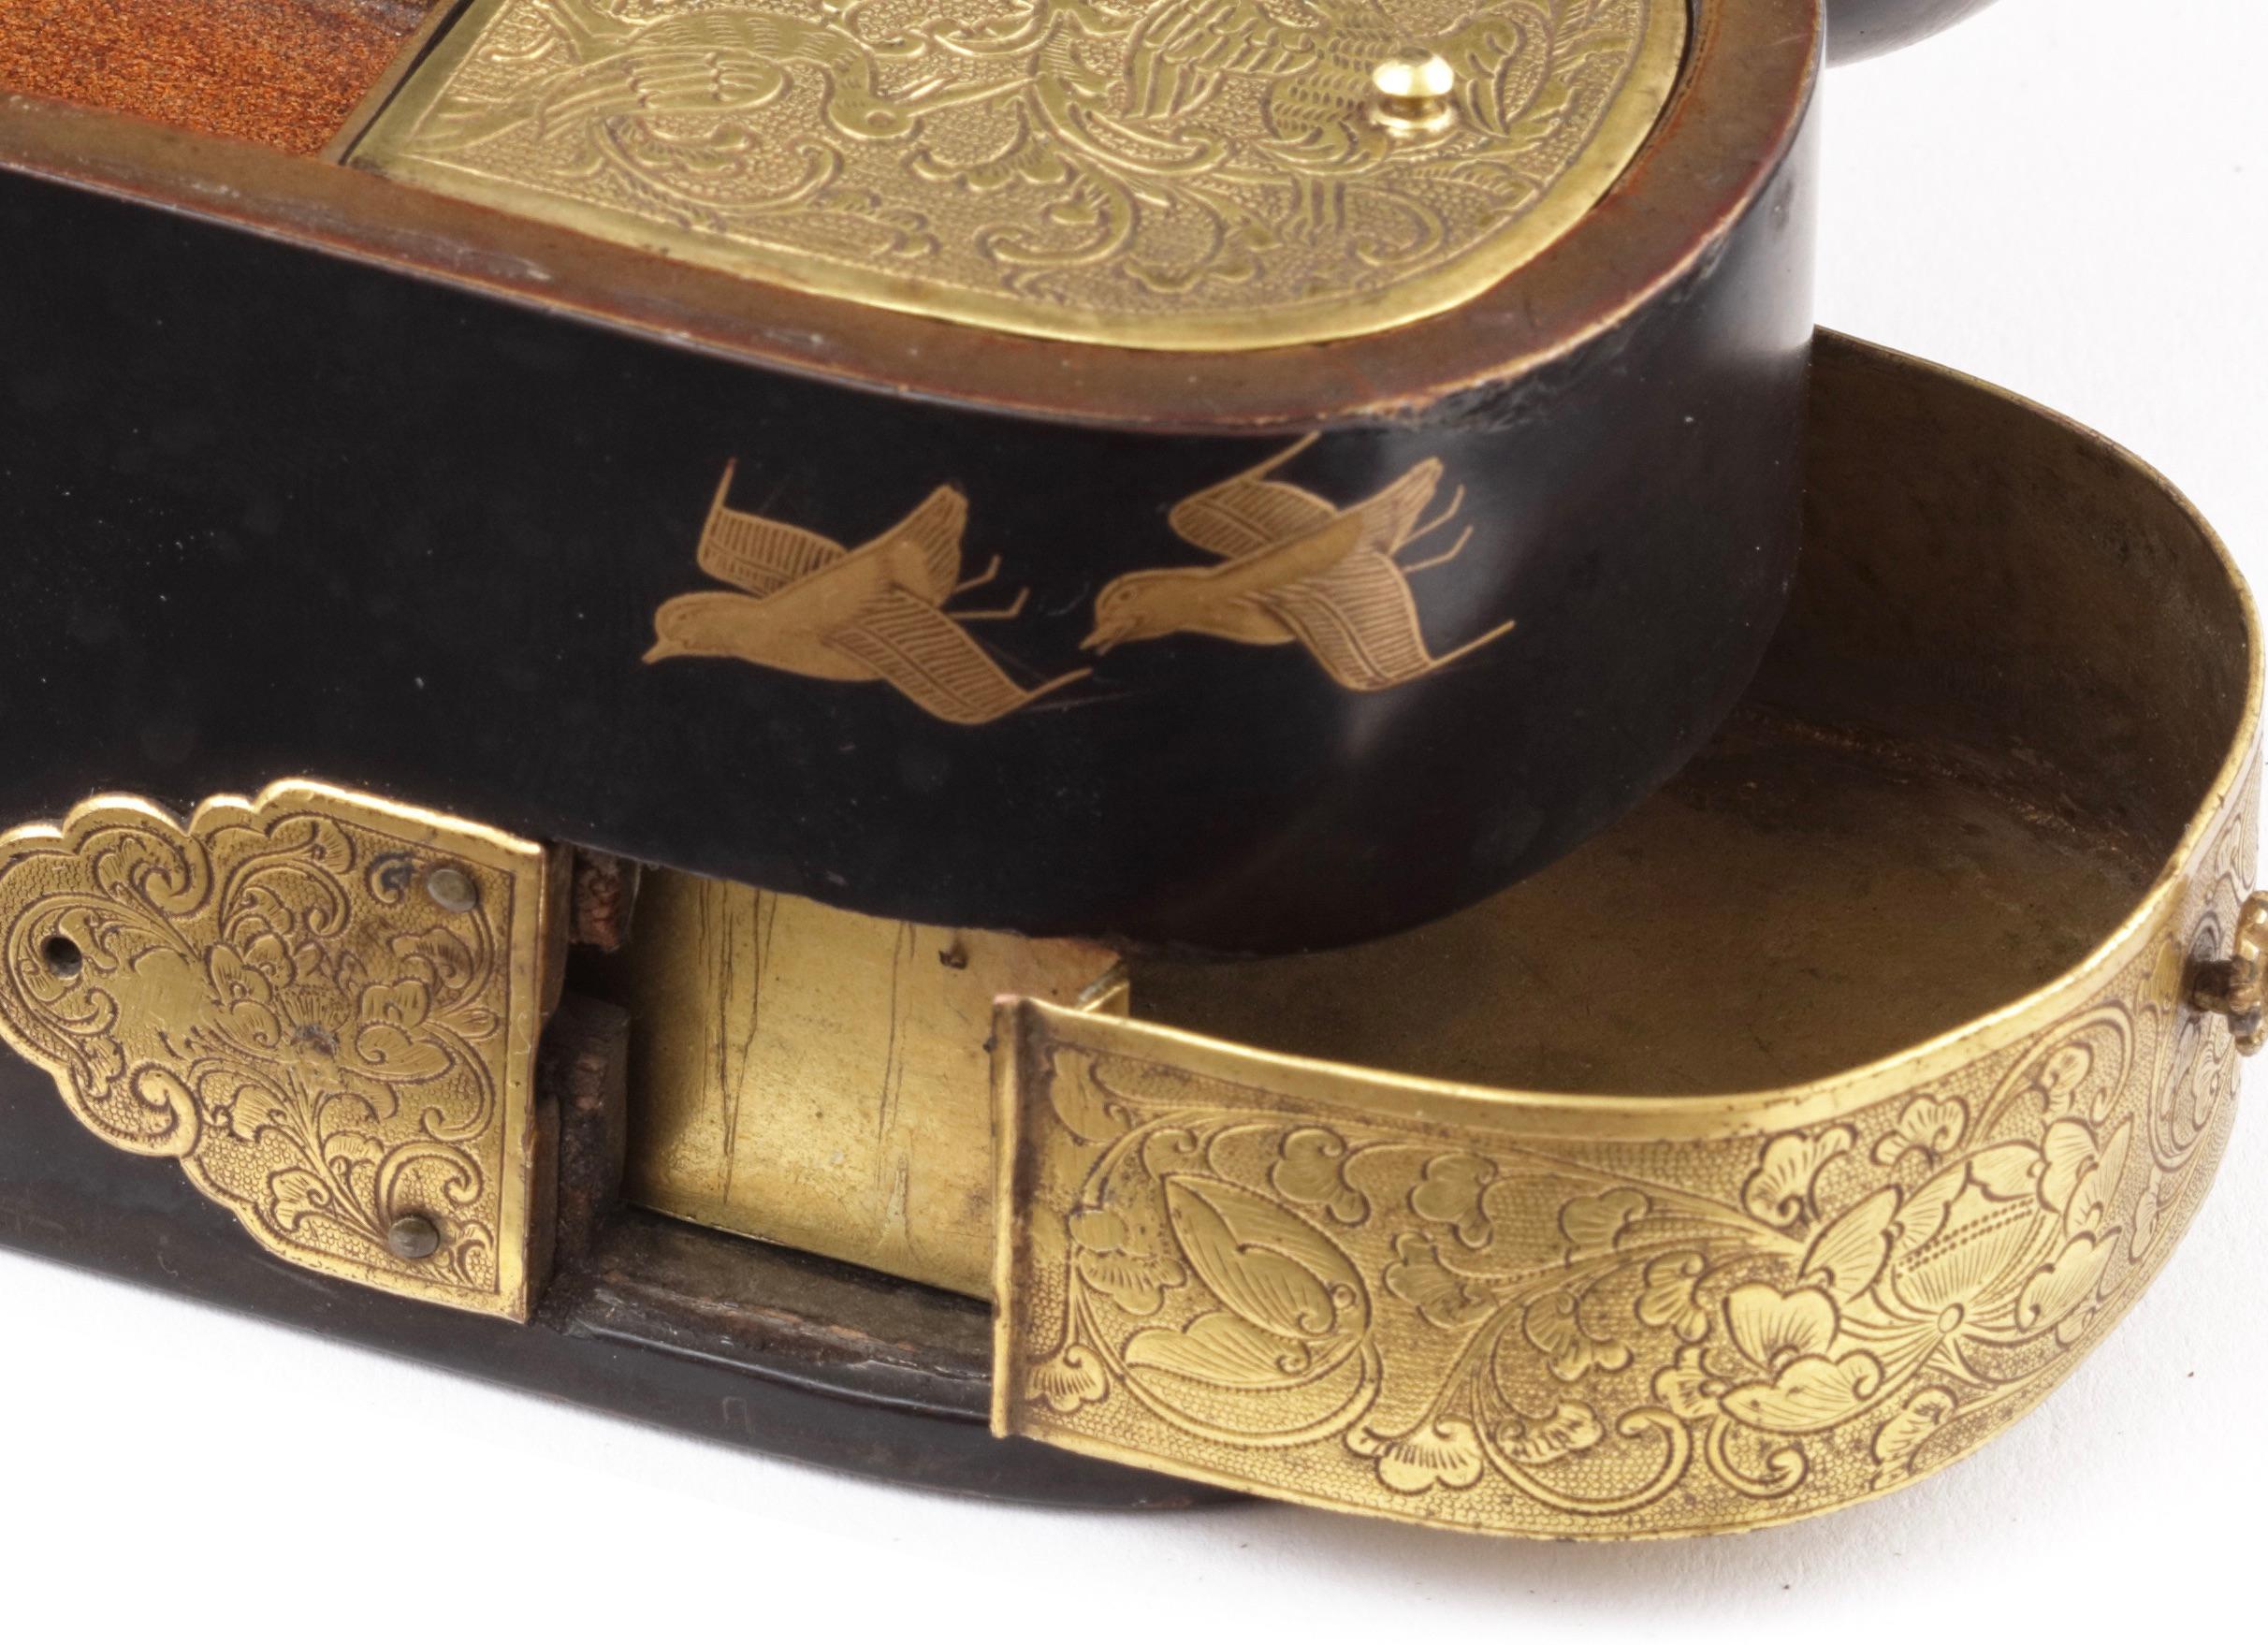 Edo Rare 17th Century Japanese Export Lacquer Medical Instrument Box For Sale